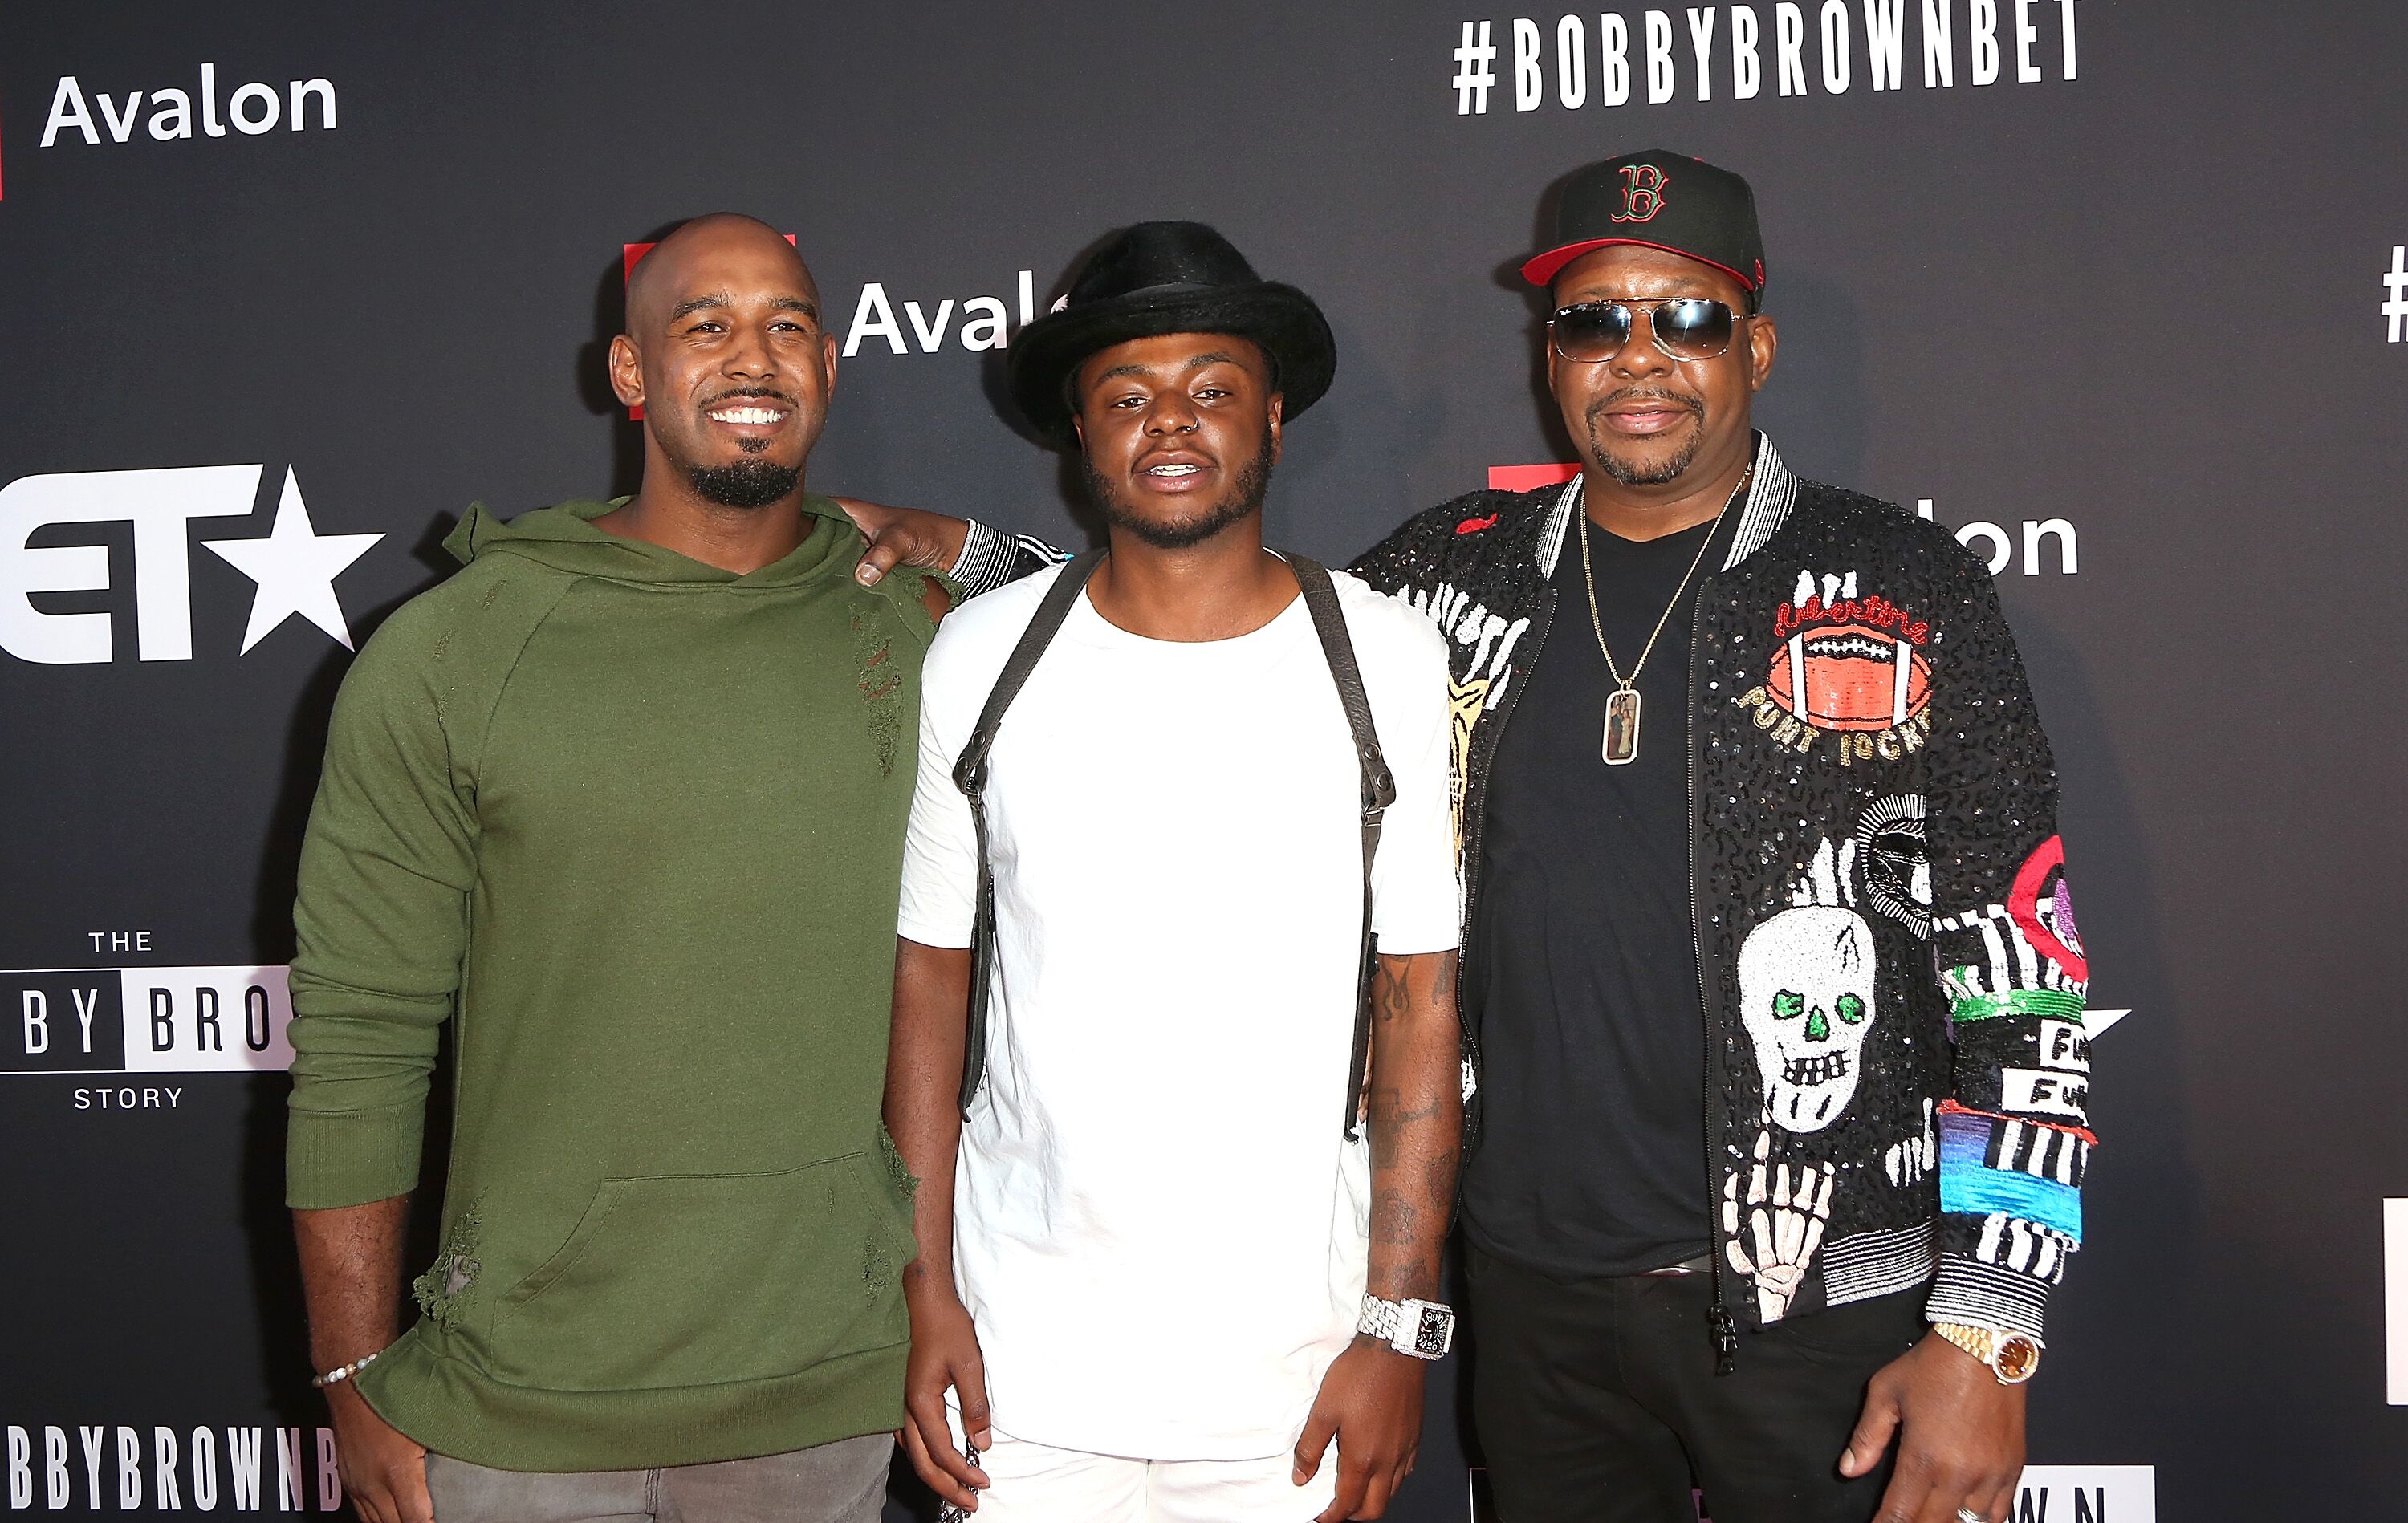 Landon Brown, Bobby Brown Jr., and Bobby Brown at the premiere of "The Bobby Brown Story" in 2018 in Hollywood | Source: Getty Images